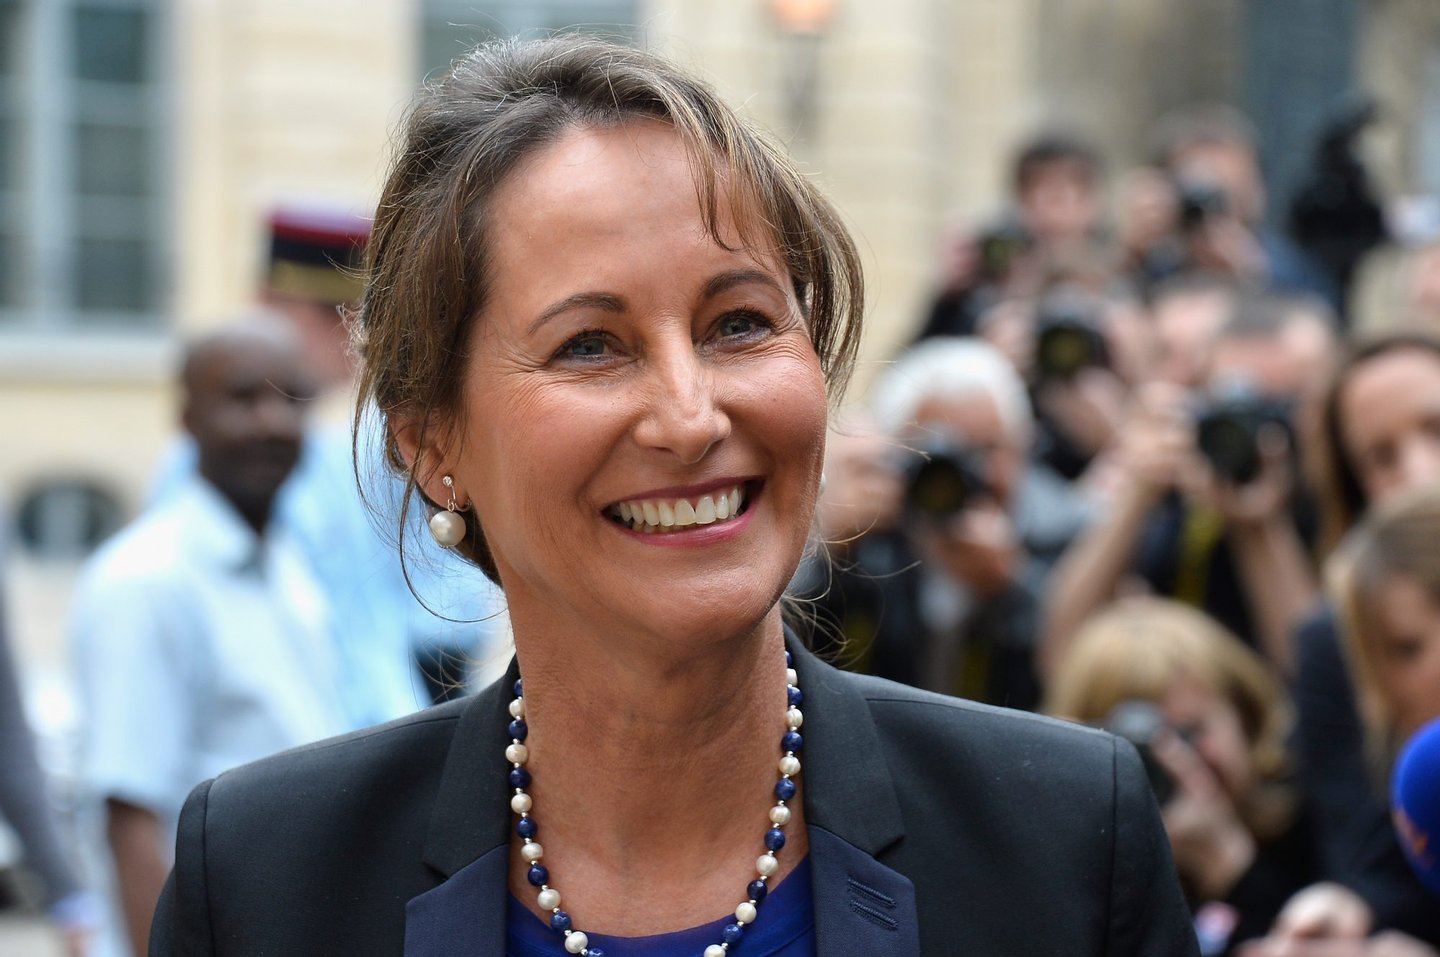 PARIS, FRANCE - APRIL 02: Newly appointed French Minister of the Ecology, Sustainable development and Energy, Segolene Royal attends the take over ceremony on April 2, 2014 in Paris, France. (Photo by Pascal Le Segretain/Getty Images)